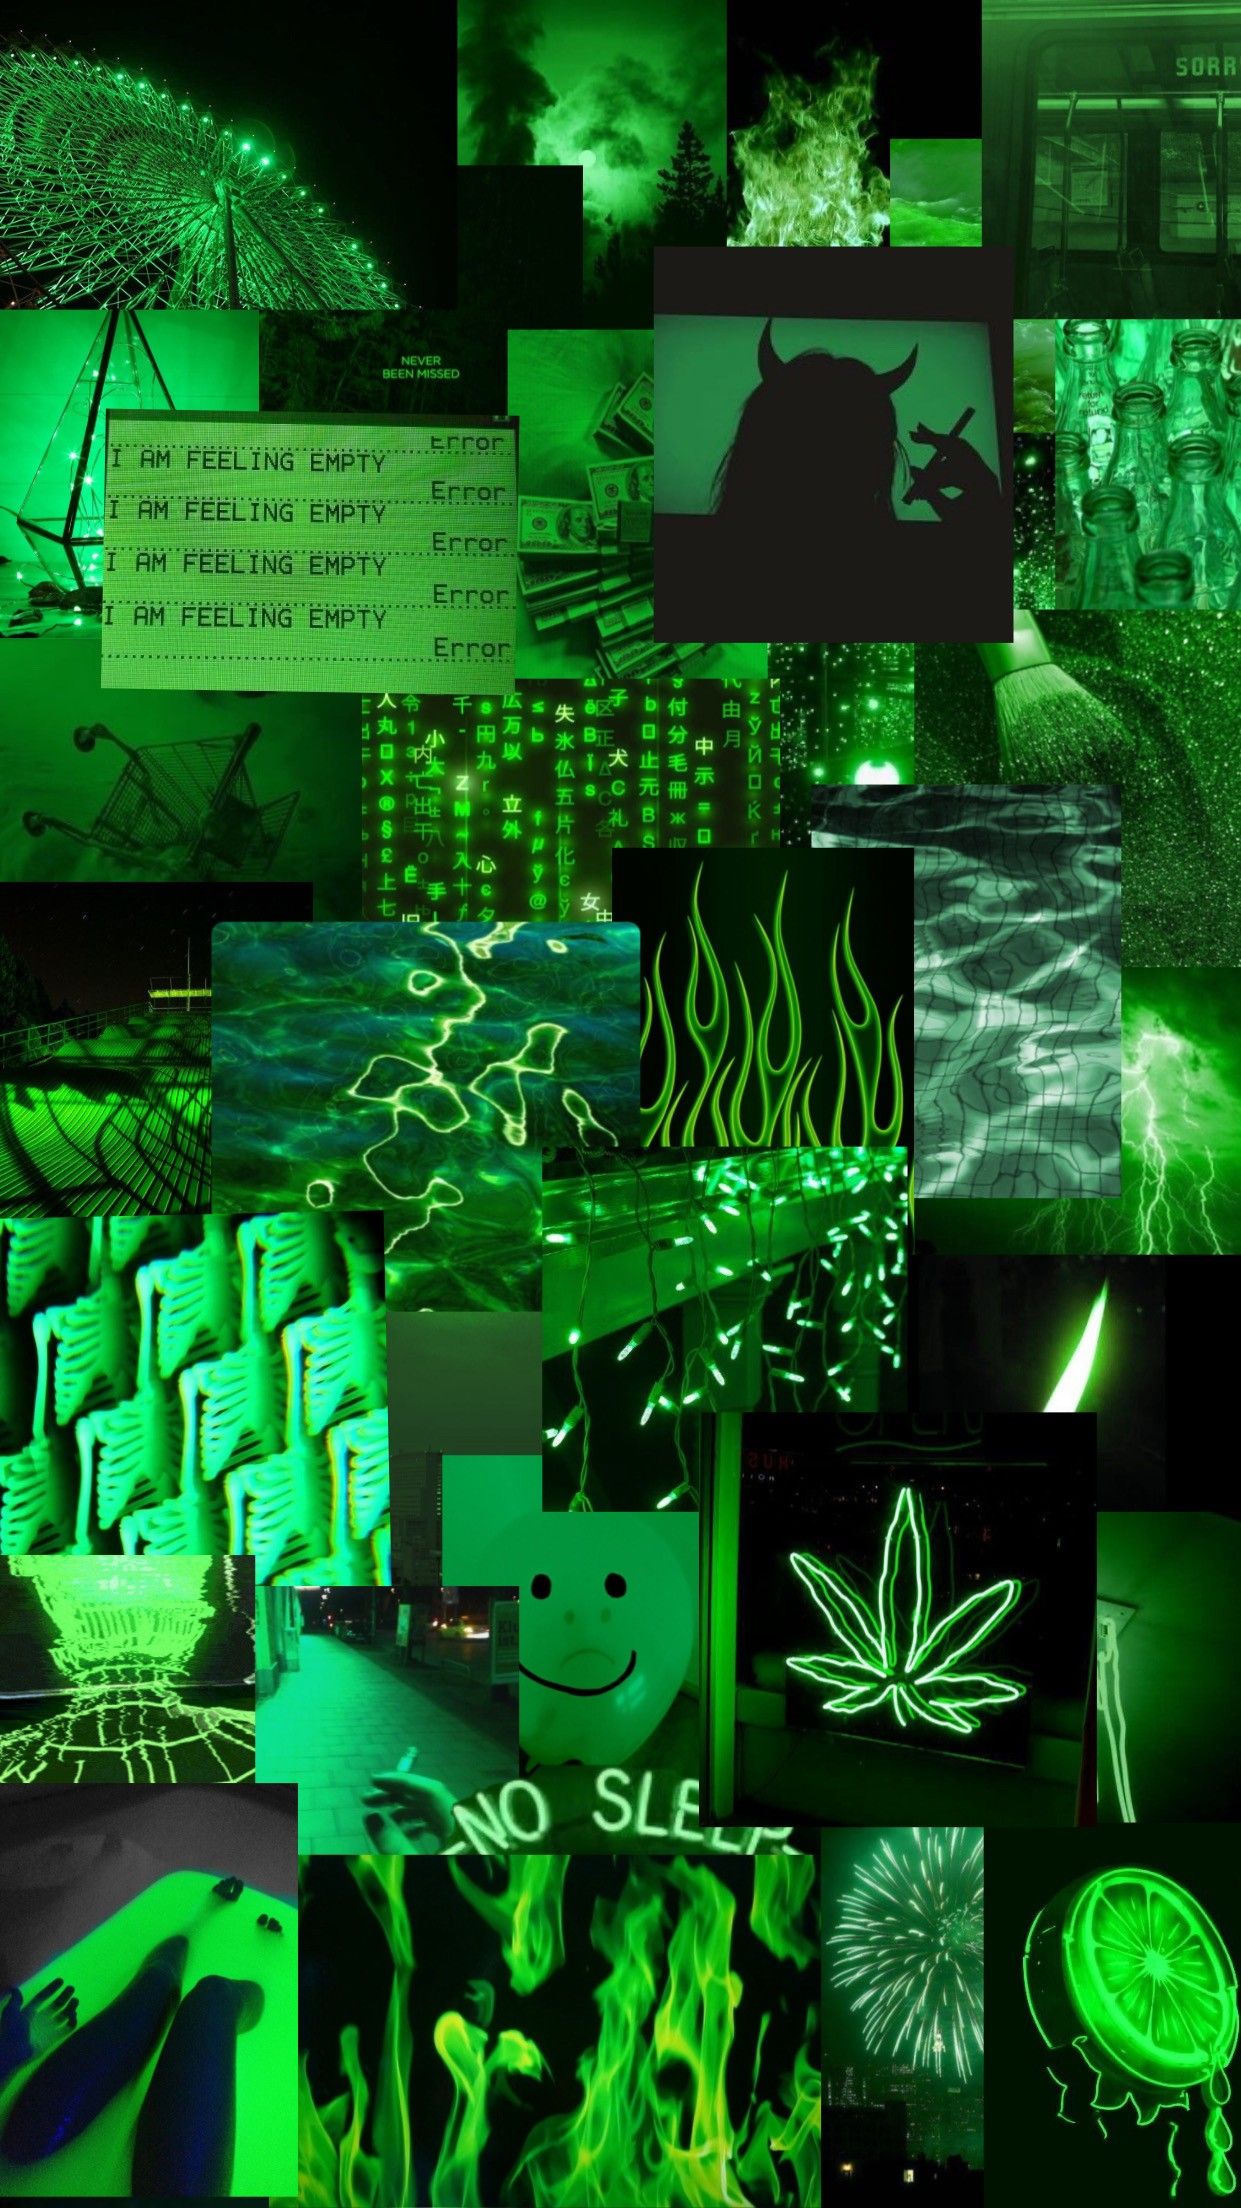 A collage of pictures with green light - Lime green, neon green